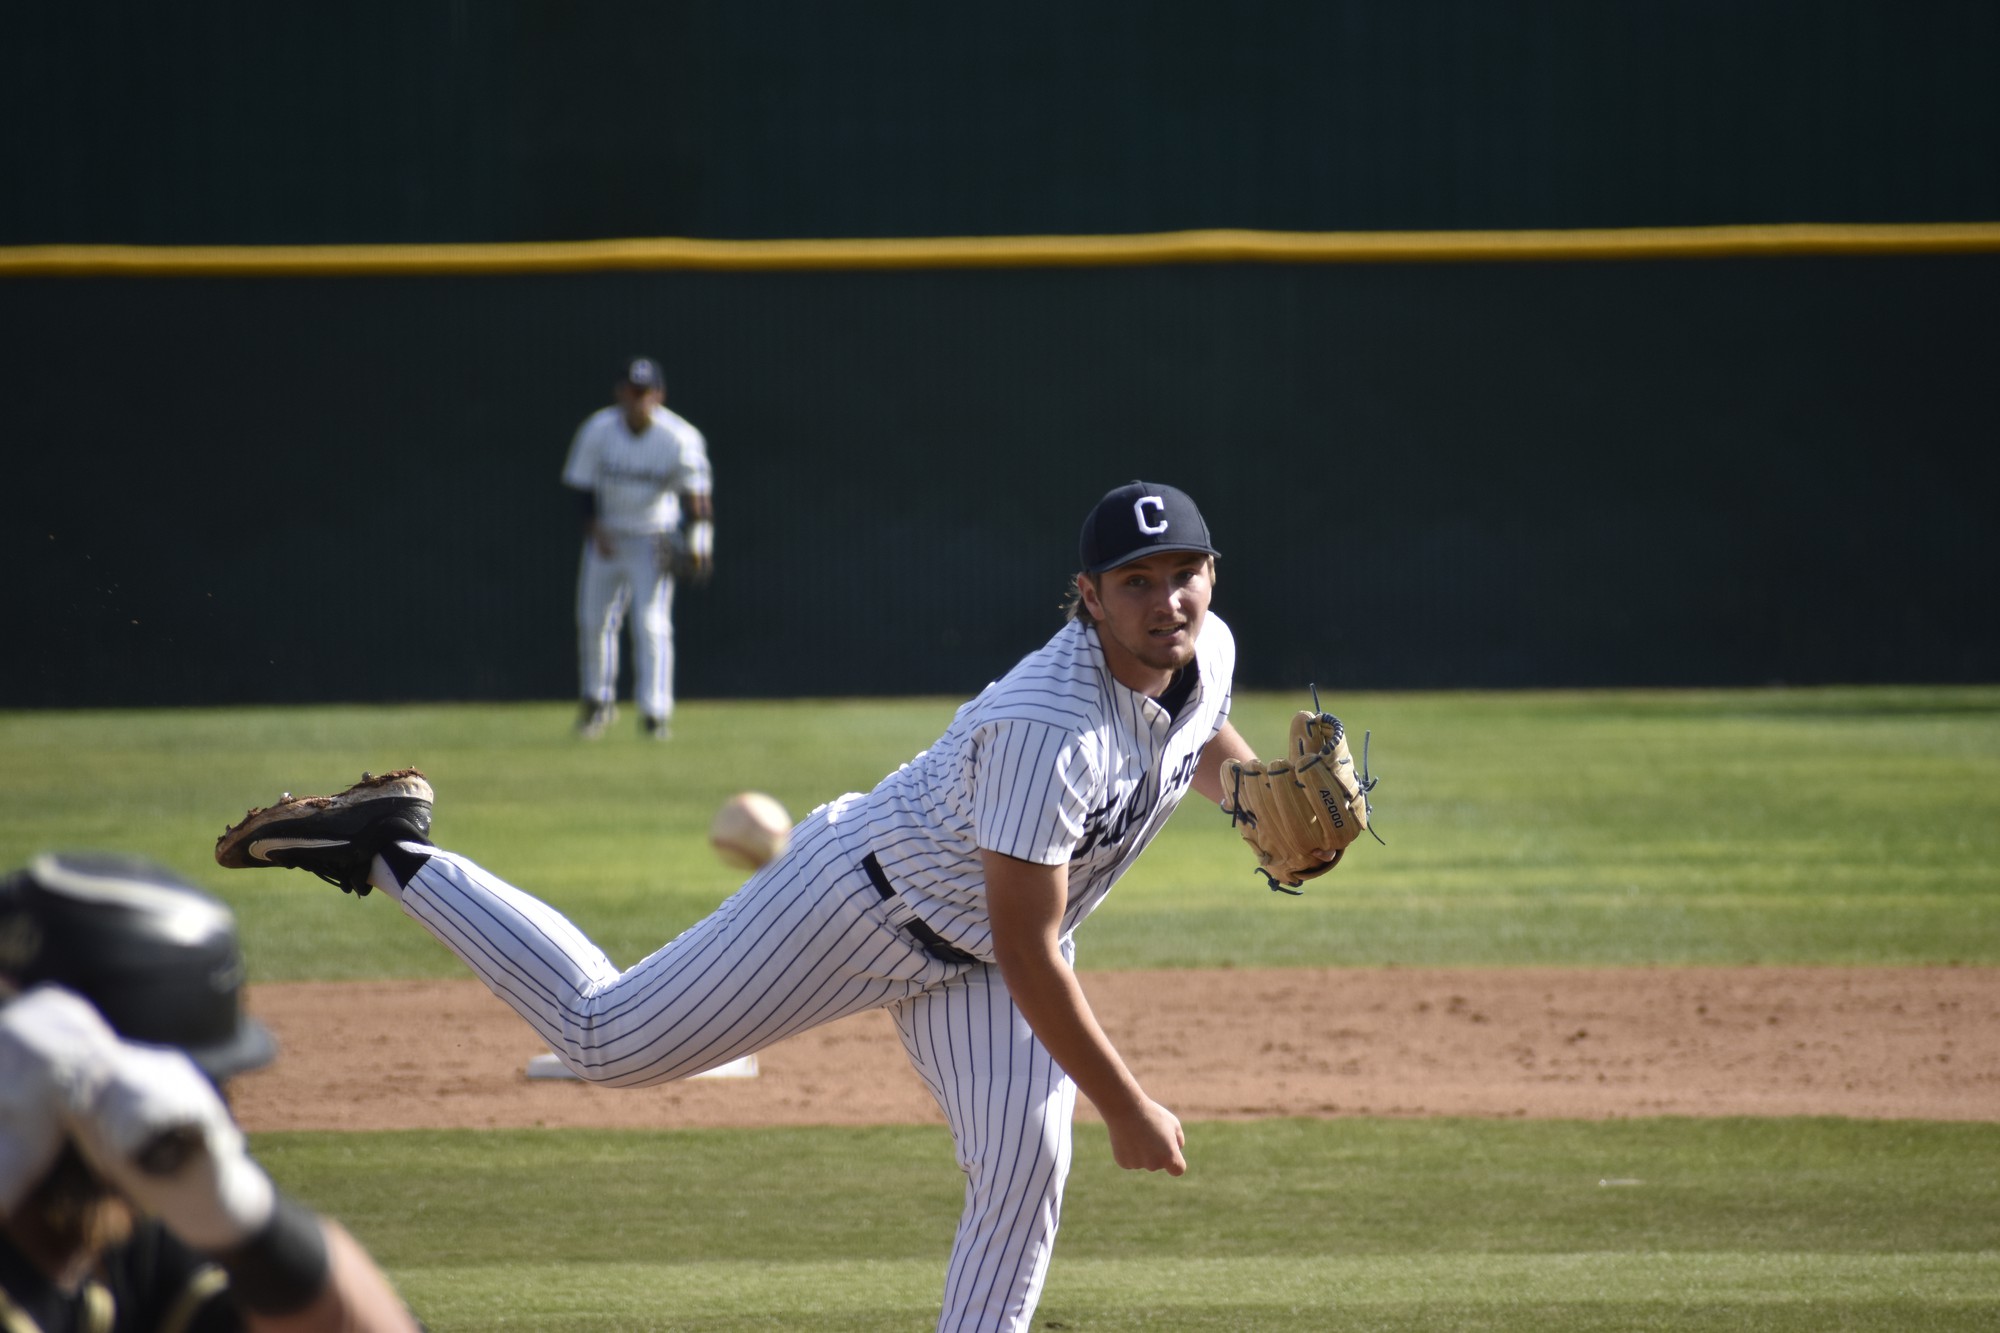 Myles Johnson just after releasing the ball on a pitch. 